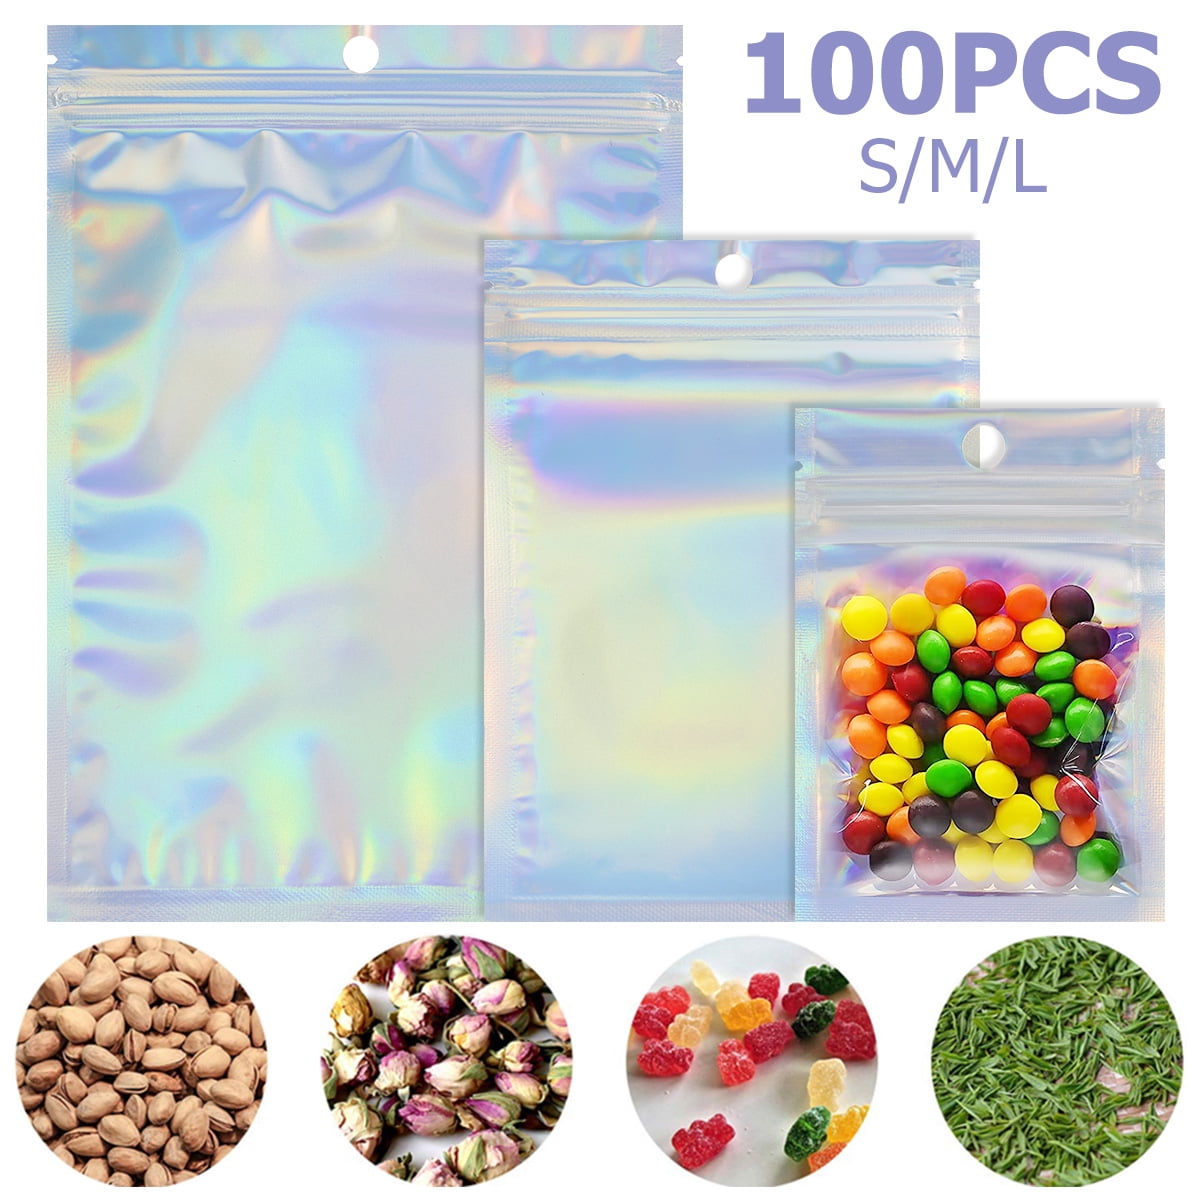  100 PCS Mylar Holographic Bags Packaging Bags, Glossy  Resealable Smell Proof Foil Pouch Bags for Food Storage and  Candy,Jewelry,Sample,Party Favor Packaging for Small Business (5.9×8.66  Inch, Black) : Health & Household